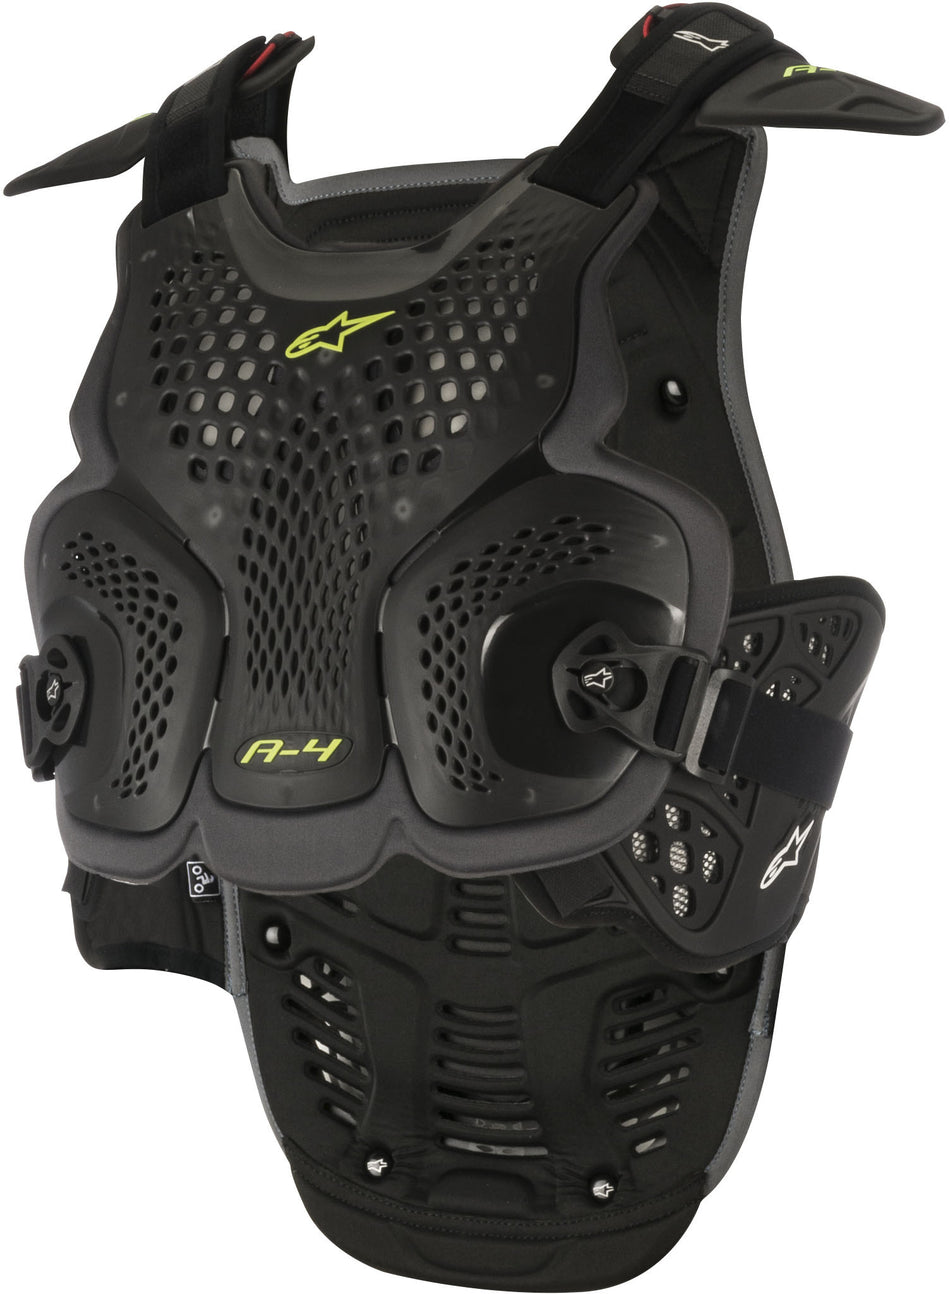 ALPINESTARS A-4 Chest Protector Black/Anthracite Xs/Sm 6701517-104-XS/S